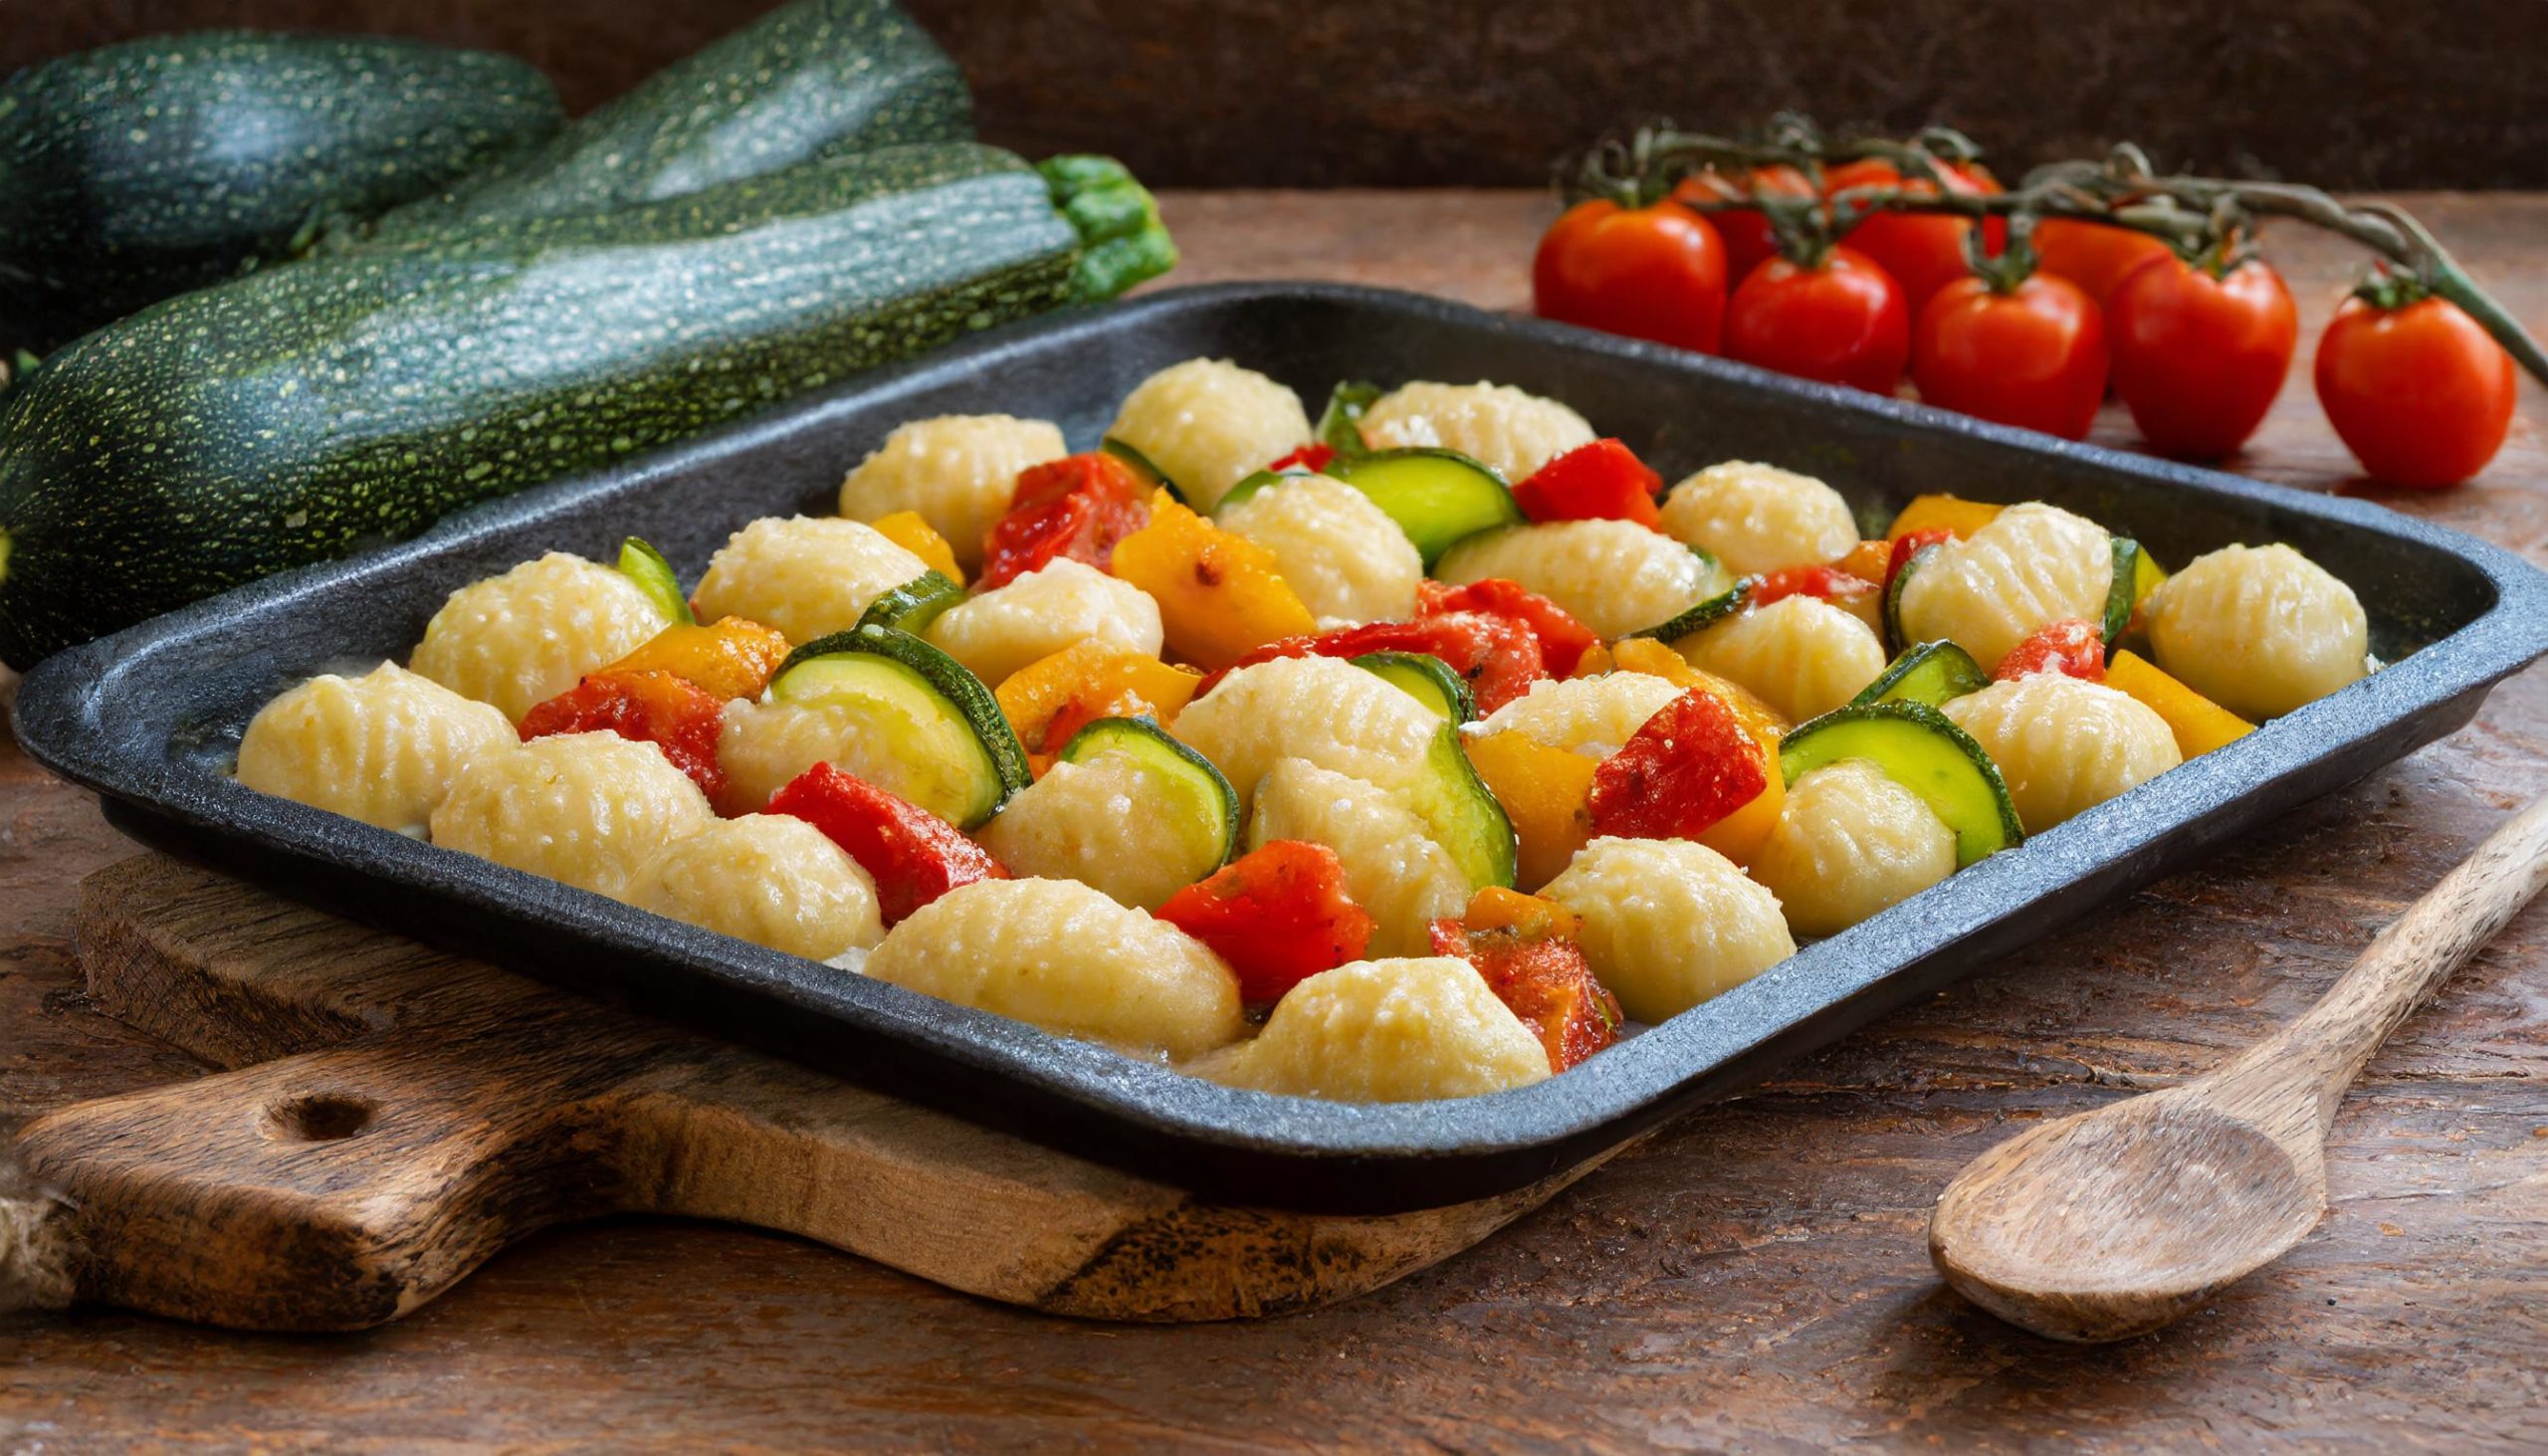 Gnocchi with zucchini, tomatoes, and bell peppers